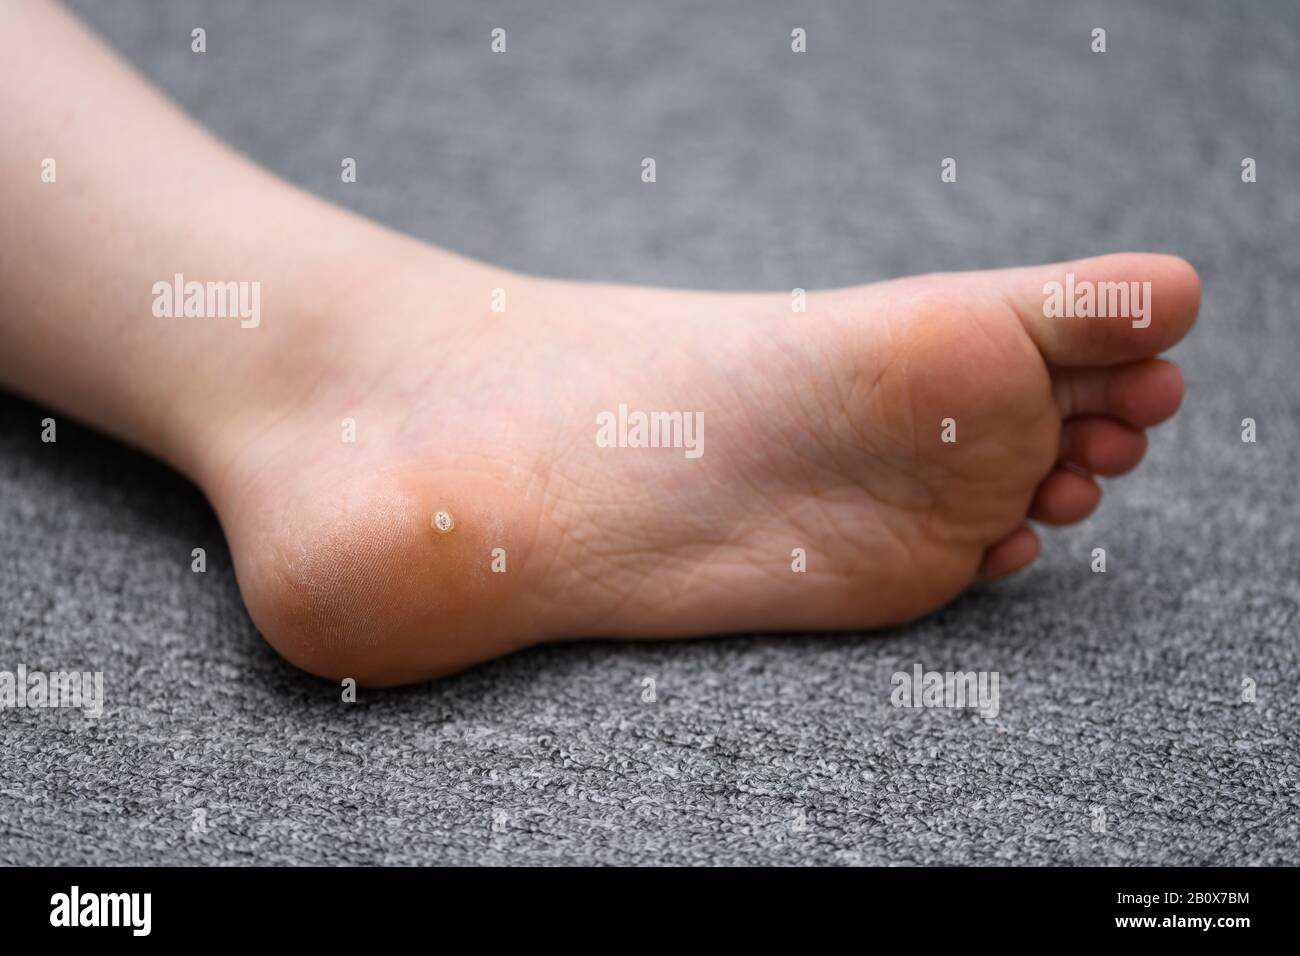 Foot wart, verrucas plantar on the foot of a child. A decease caused by the Human papillomavirus and often spread at communal showers. Stock Photo